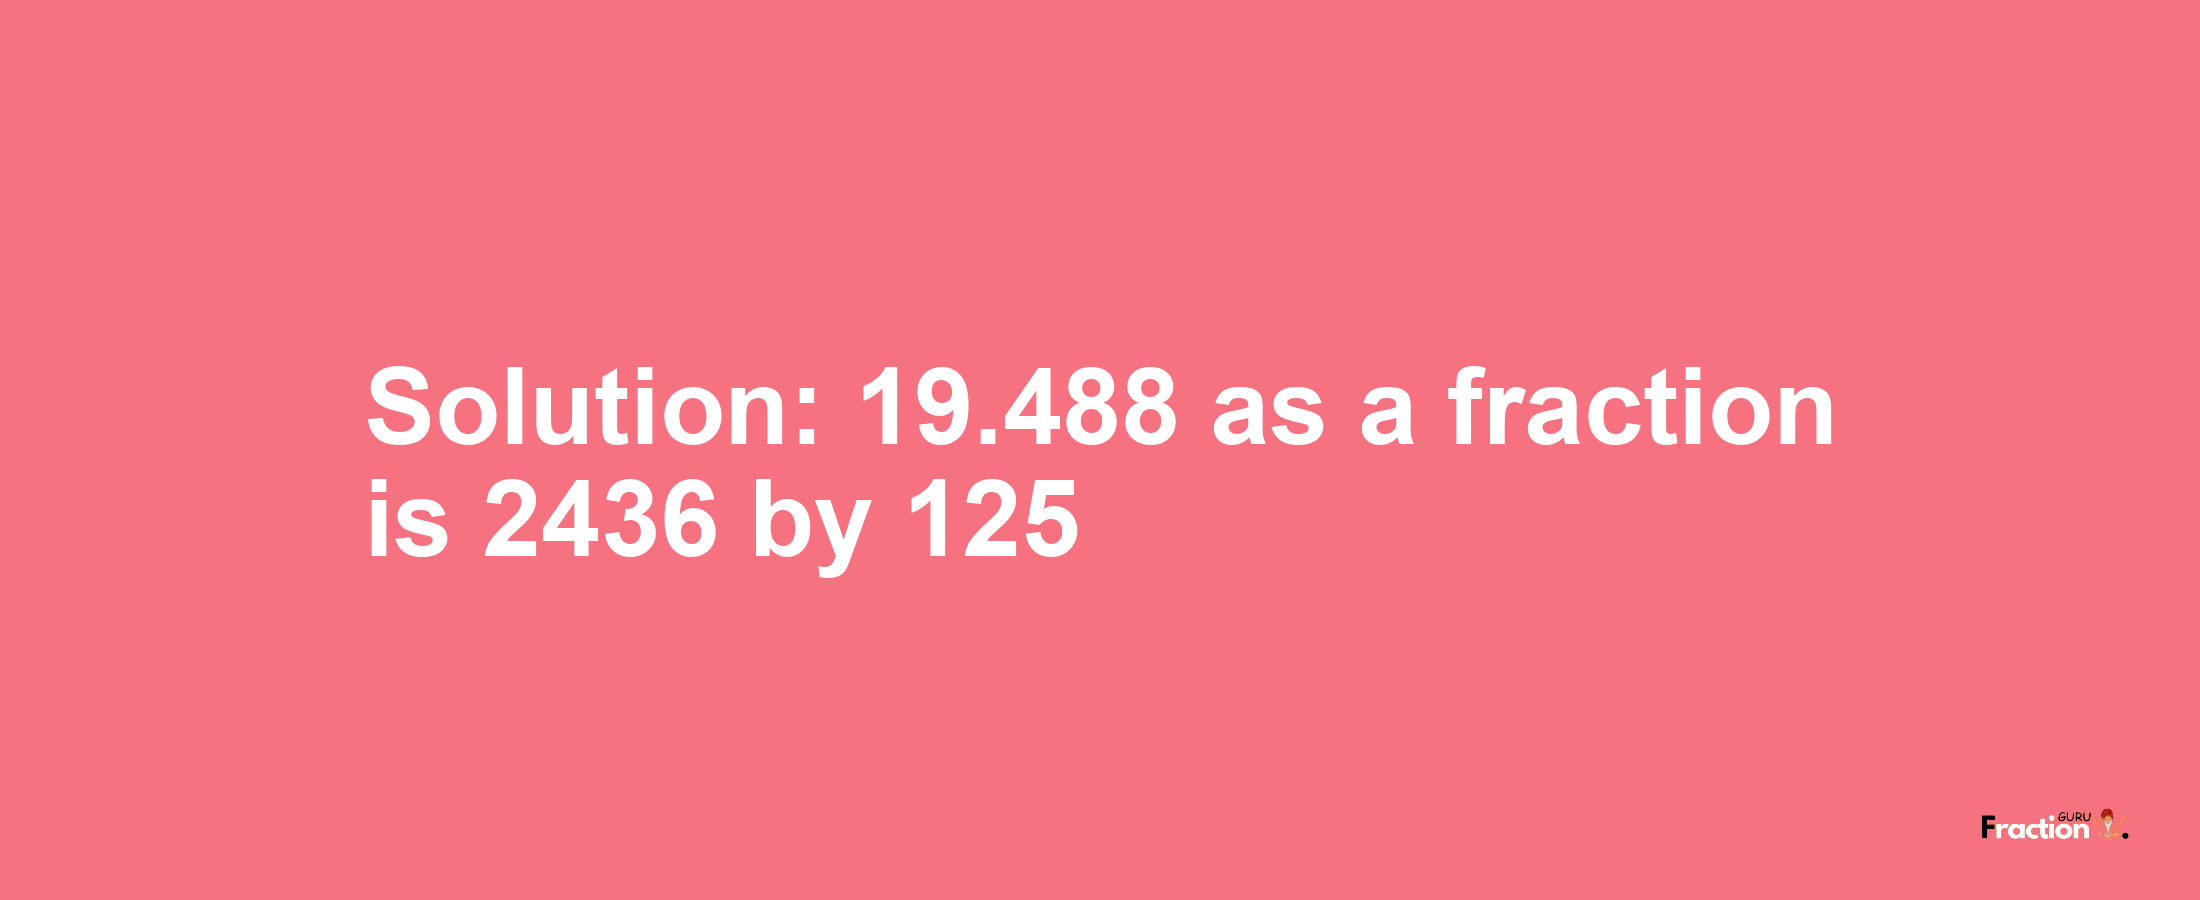 Solution:19.488 as a fraction is 2436/125